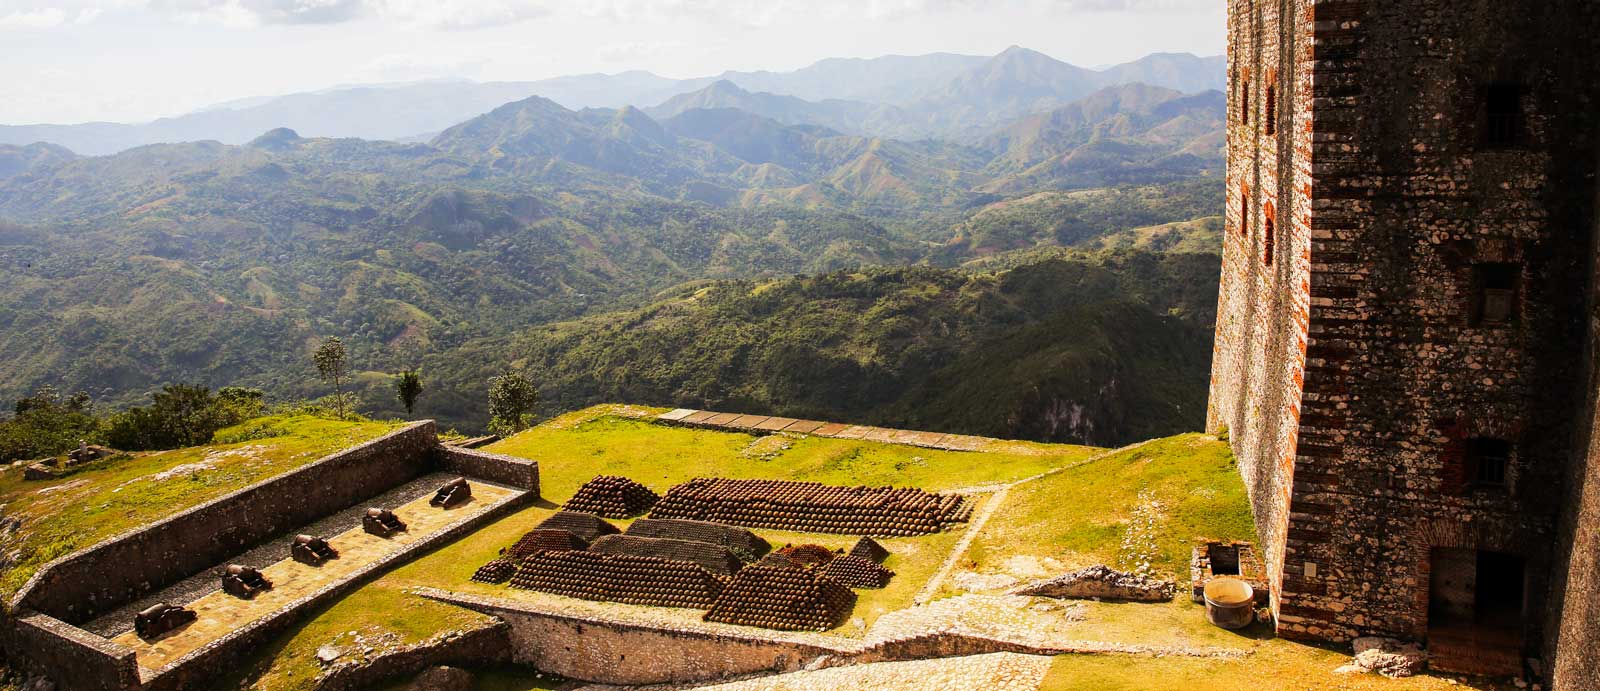 citadelle Laferrière, Haiti, with mountains in background